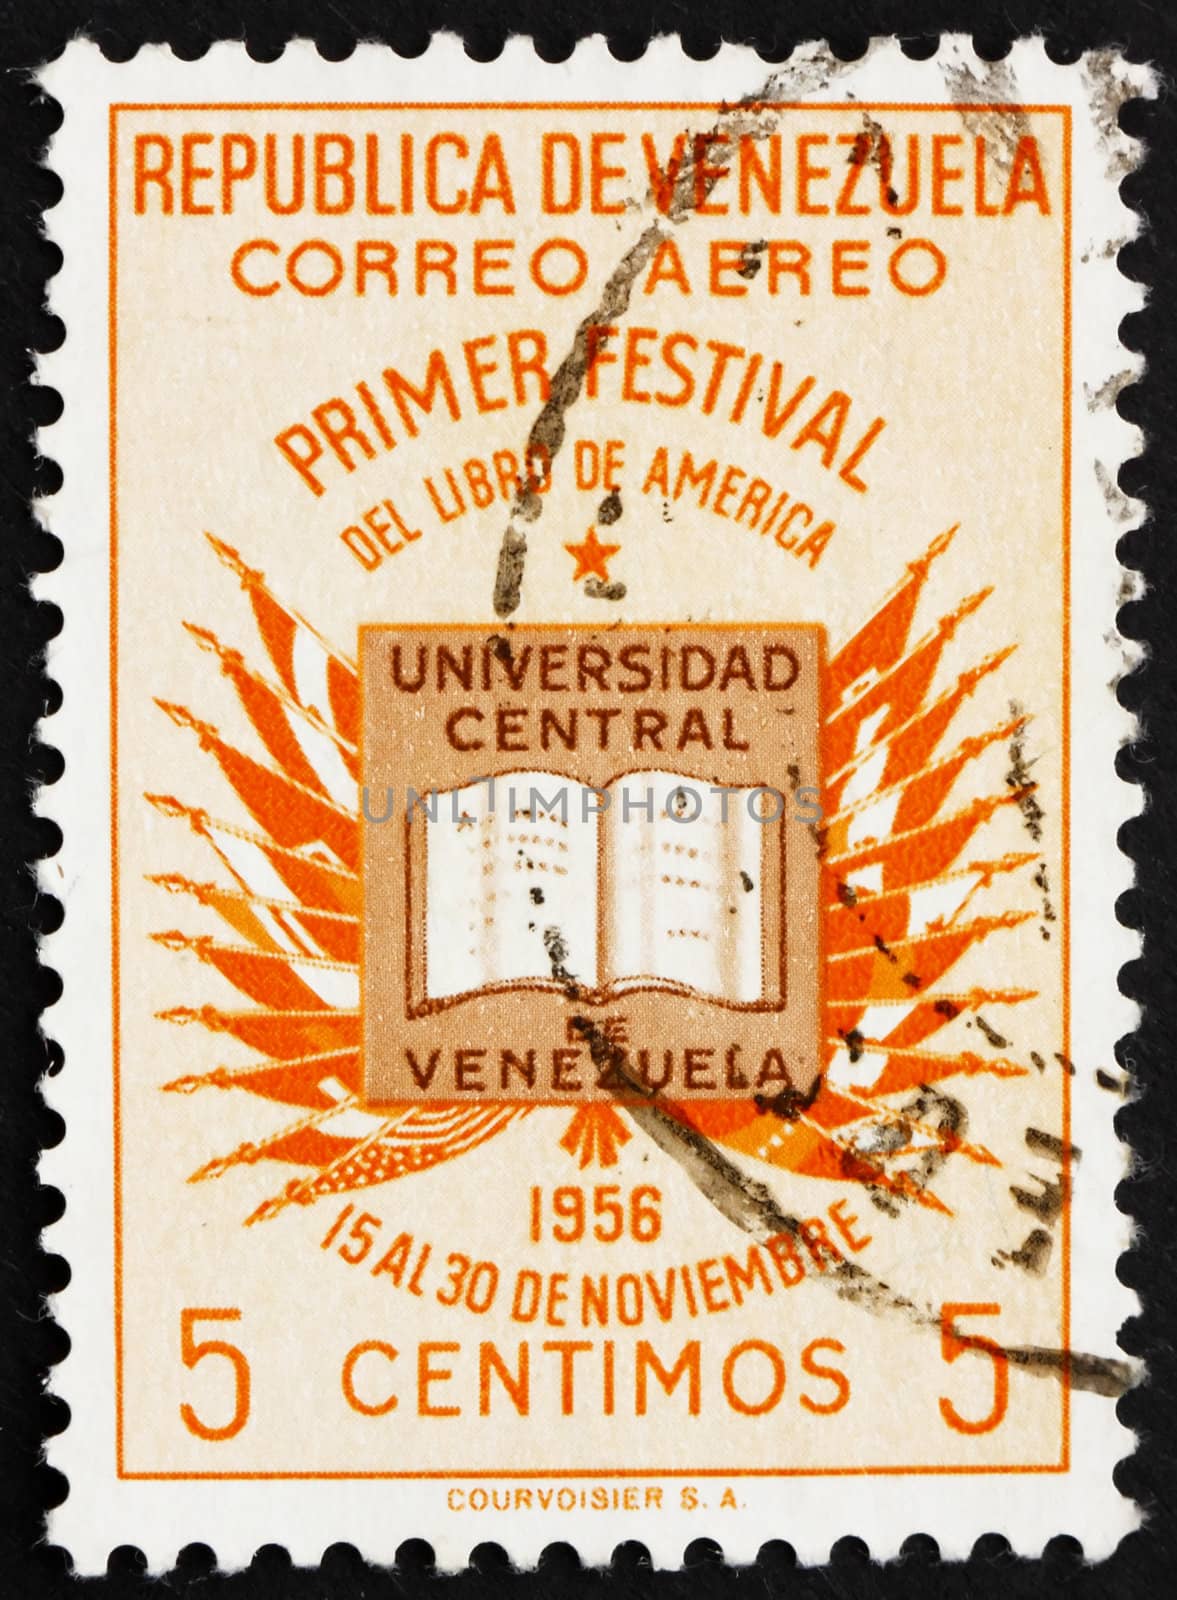 VENEZUELA - CIRCA 1956: a stamp printed in the Venezuela shows Book and Flags of American Nations, Book Festival of the Americas, circa 1956